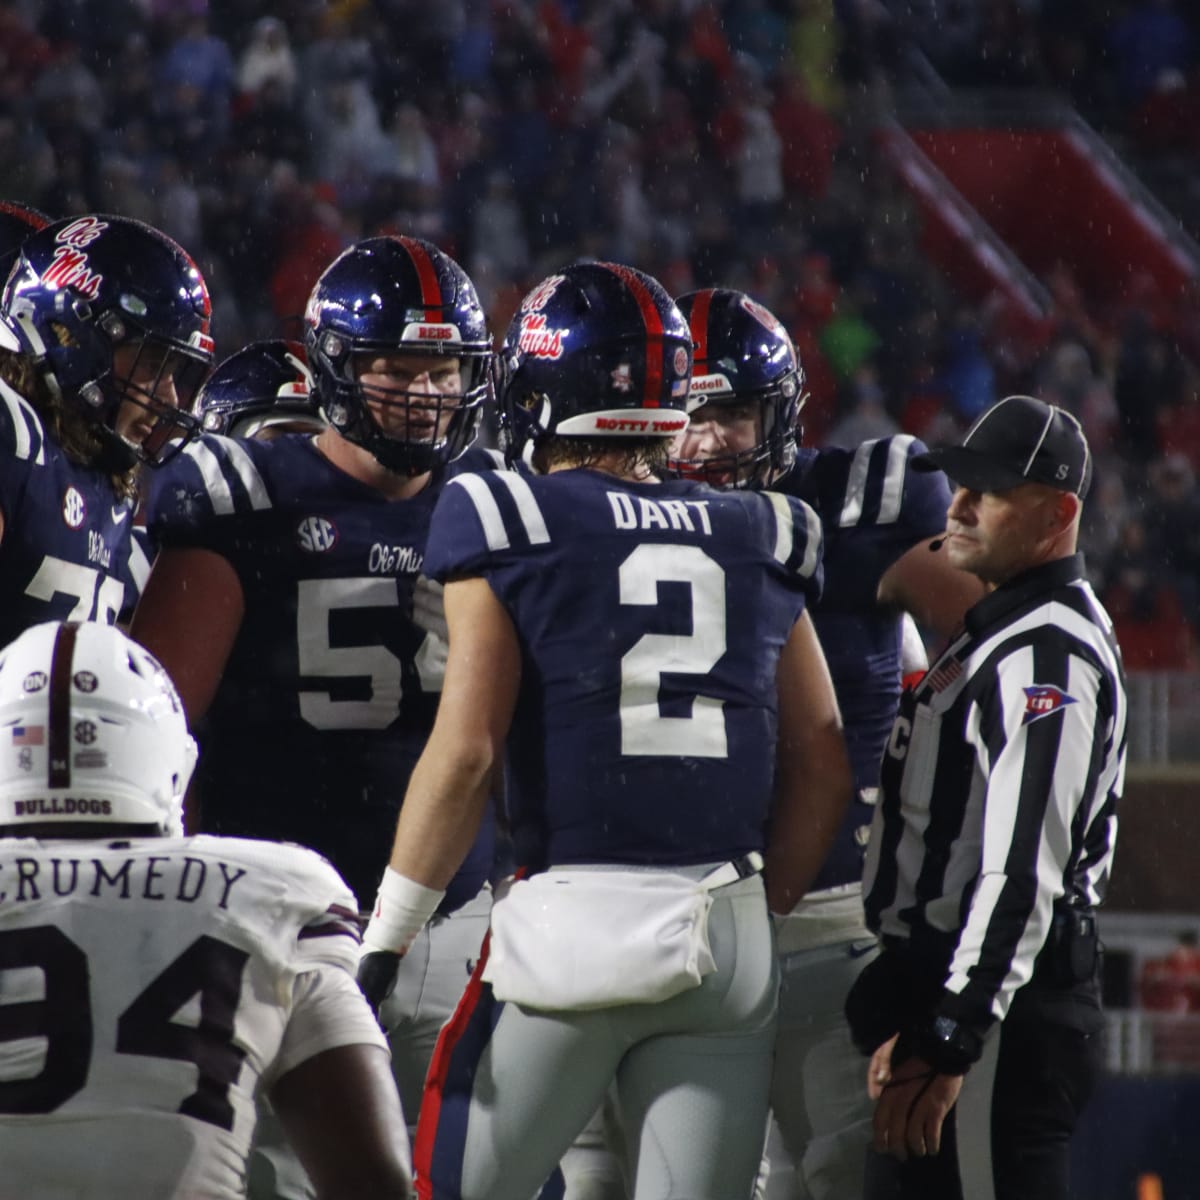 The time Mississippi State wore New England Patriots uniforms